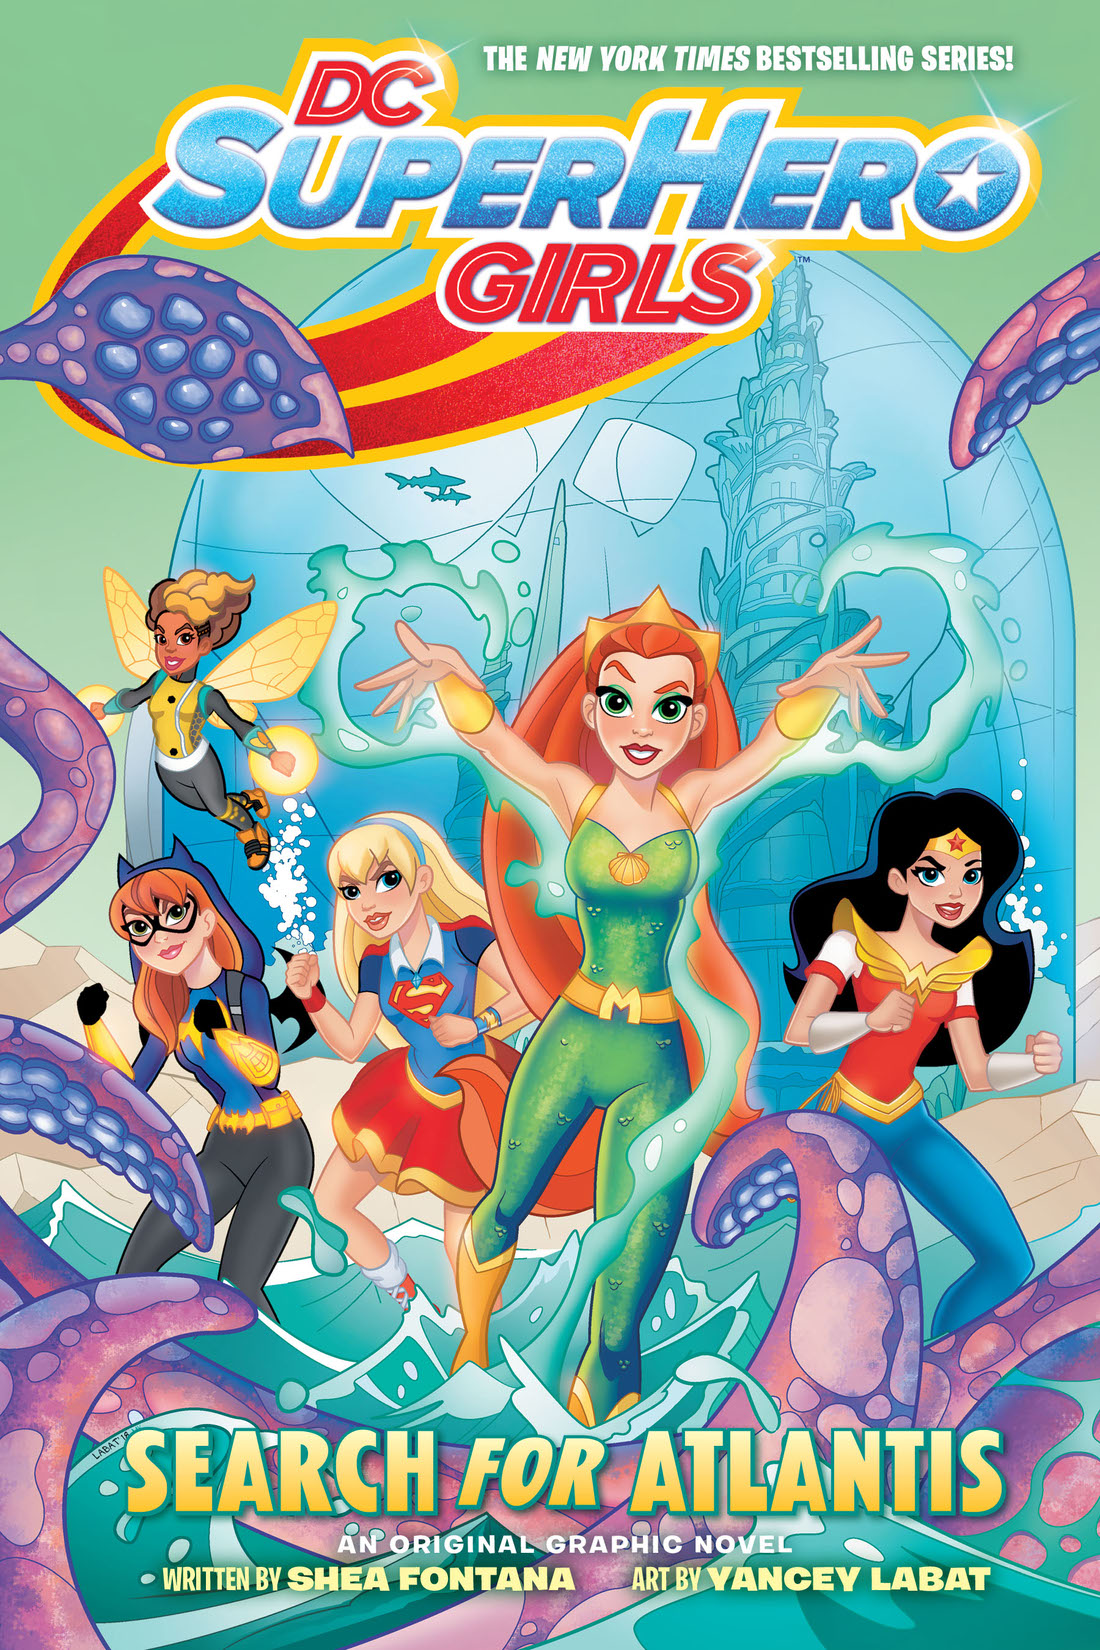 DC Super Hero Girls: Search for Atlantis preview images